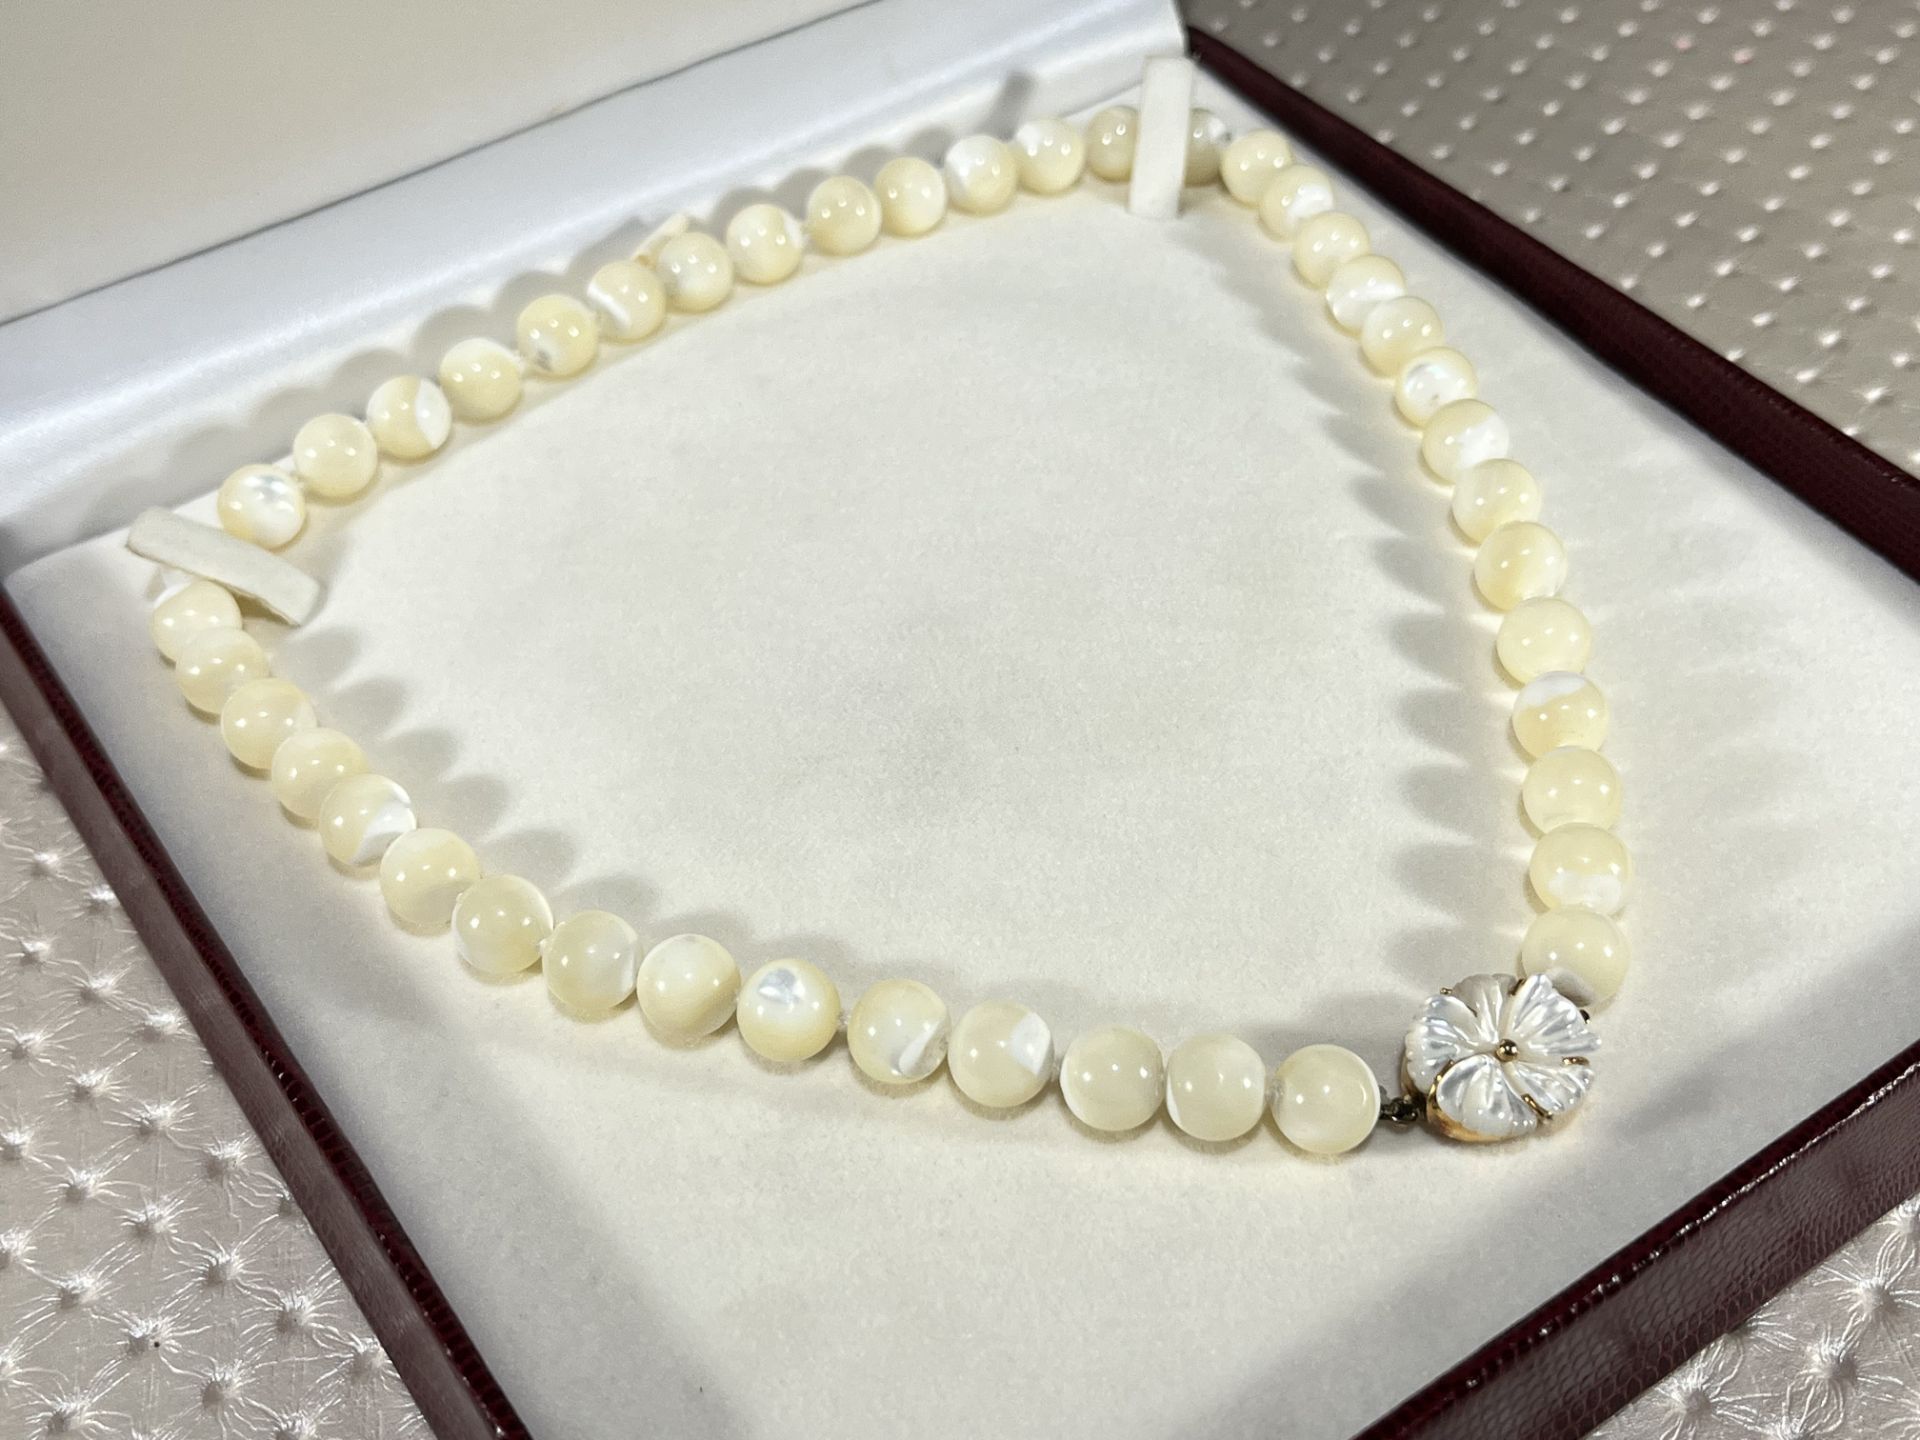 Elegant mother-of-pearl and mother-of-pearl necklace, mounted in 18k gold